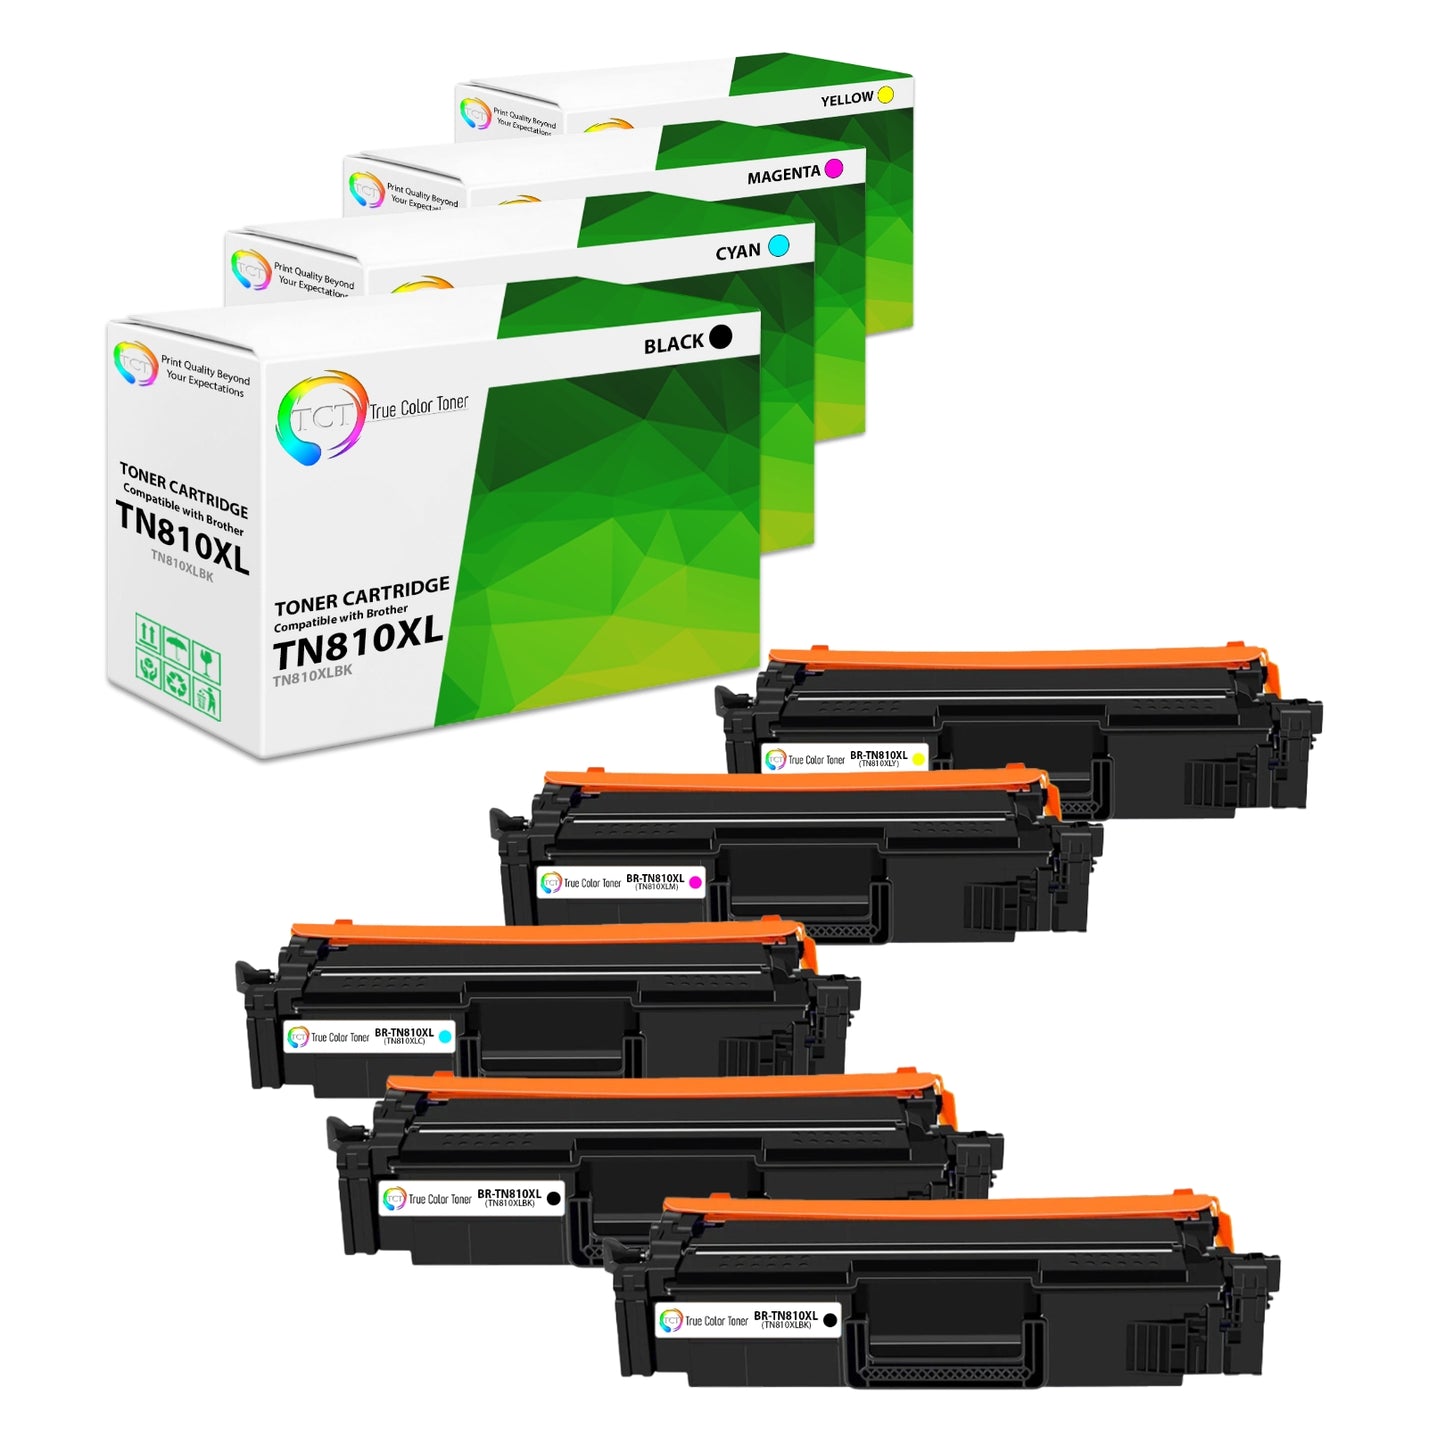 TCT Compatible Toner HY Cartridge Replacement for the Brother TN-810 Series - 5 Pack (BK, C, M, Y)